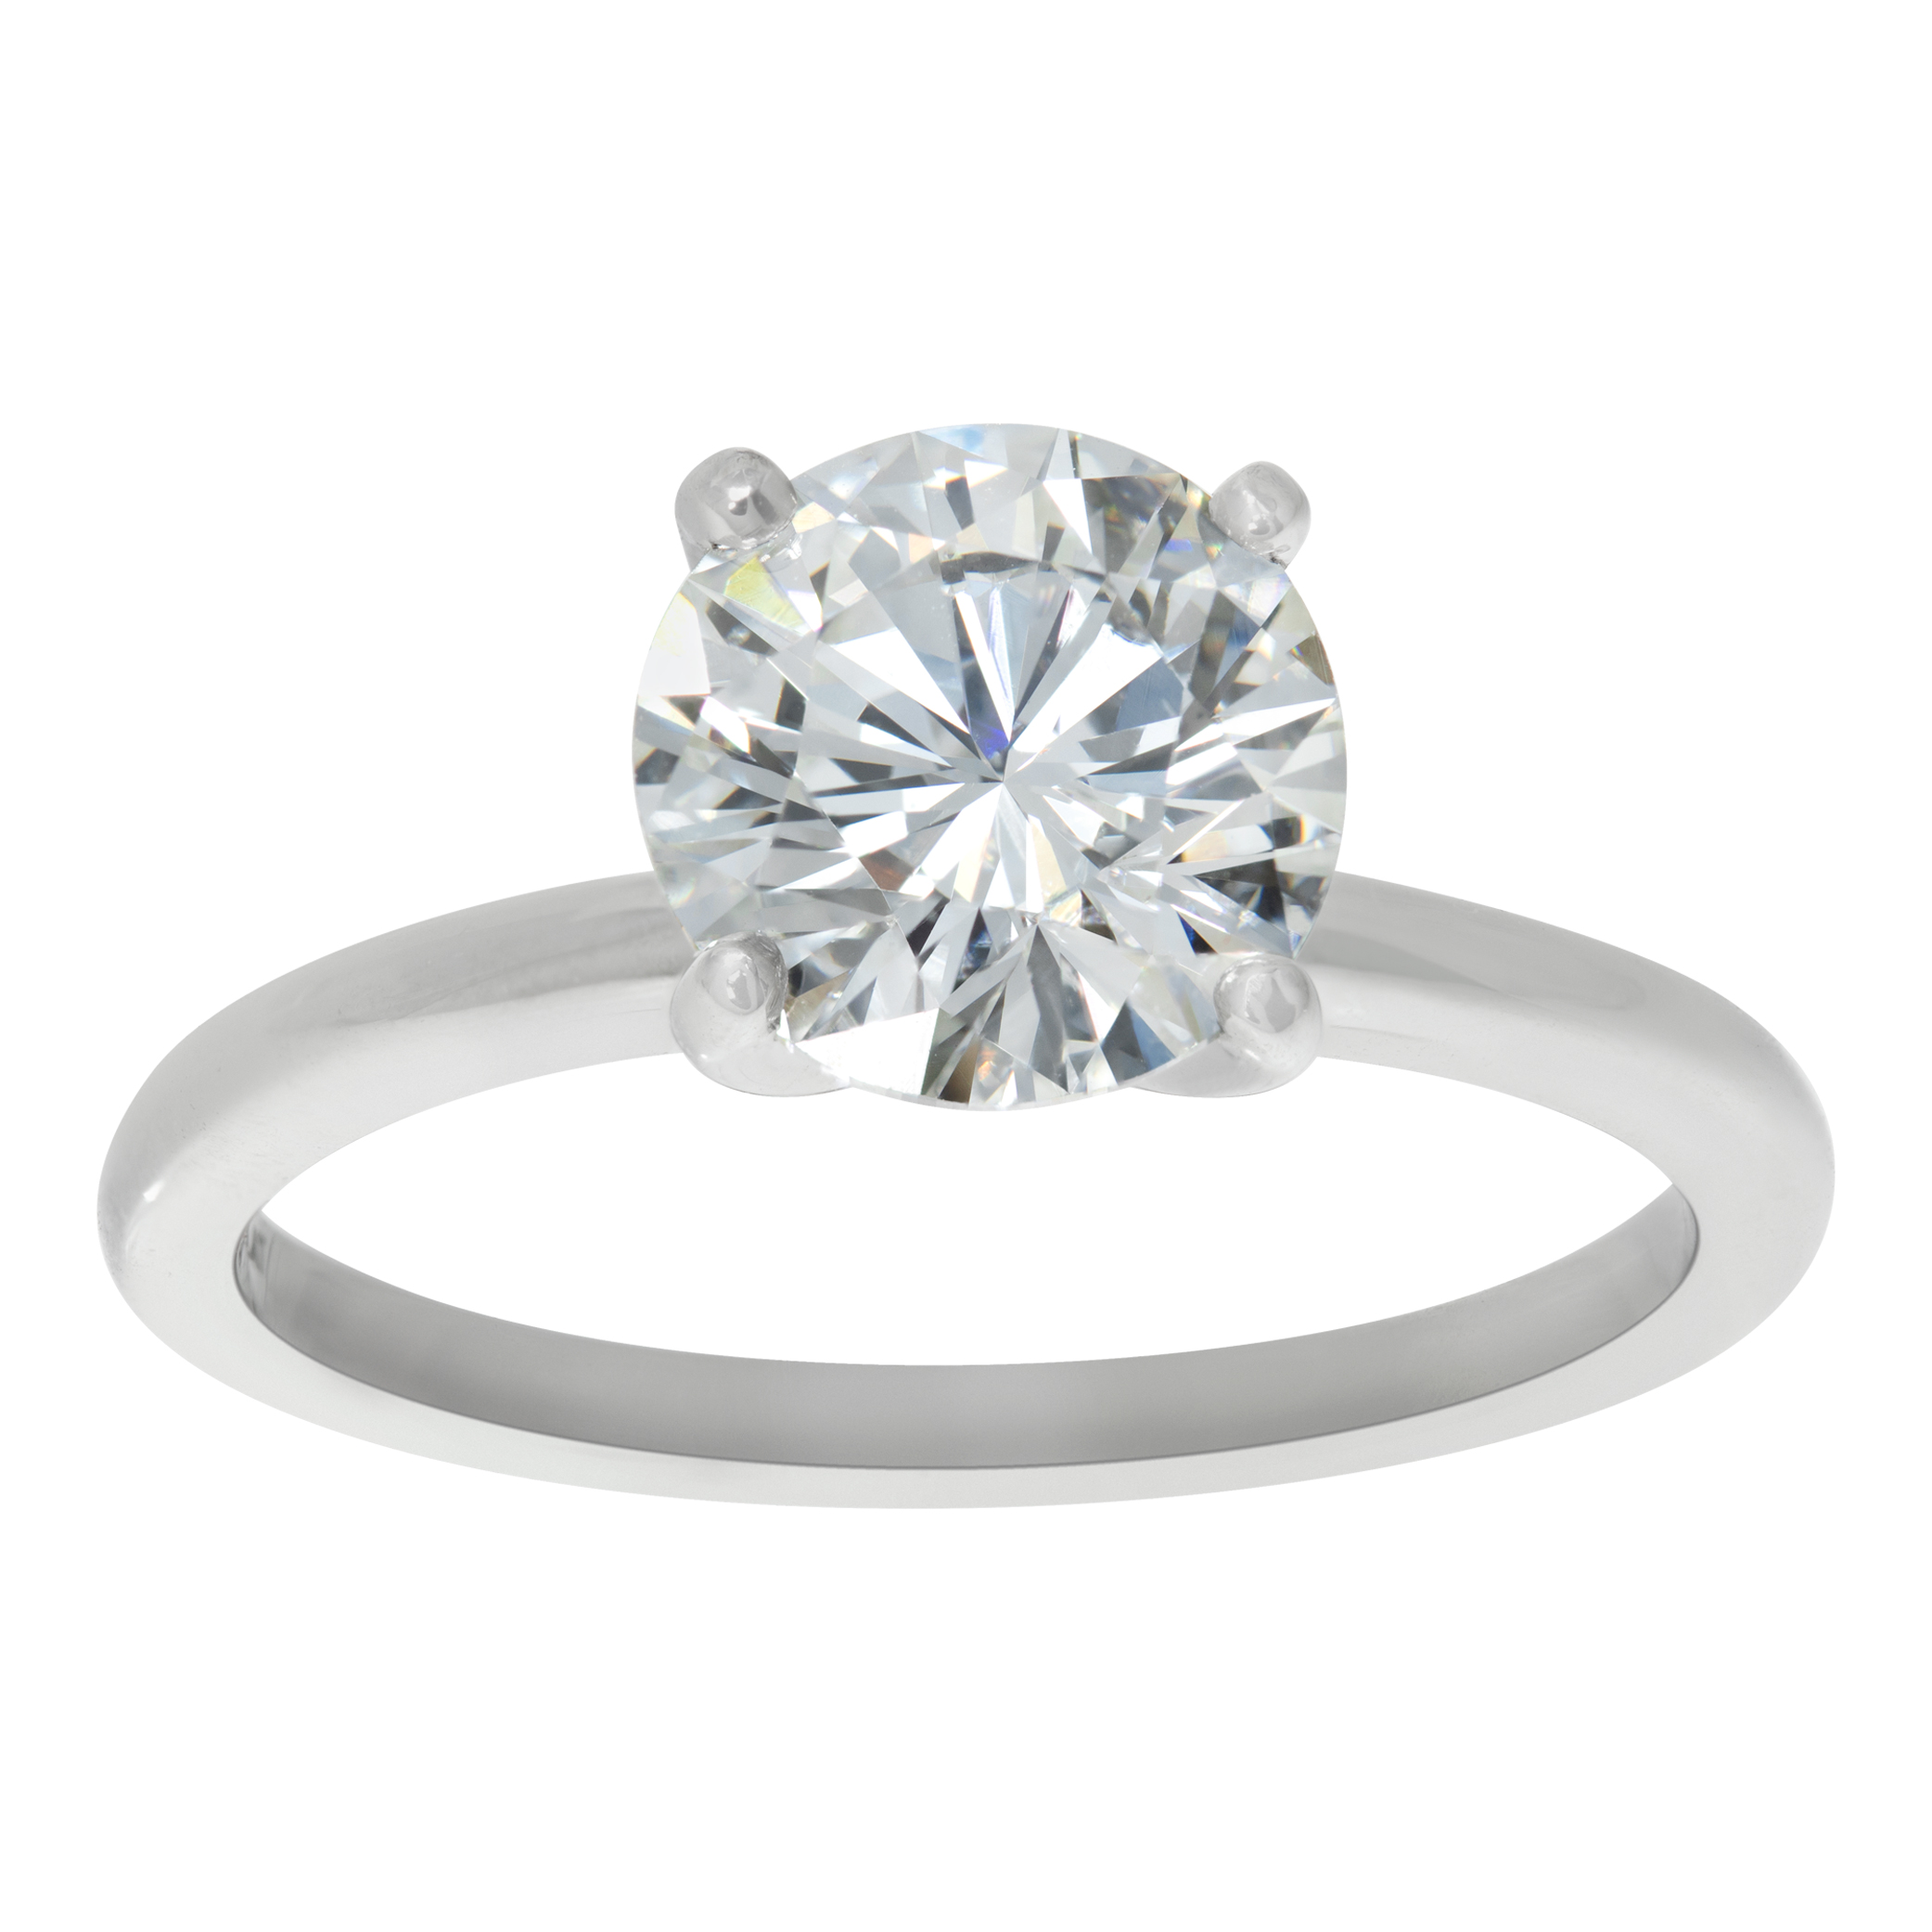 GIA certified round brilliant diamond 2 carat (H color, SI1 clarity) ring set in platinum 4 prong setting